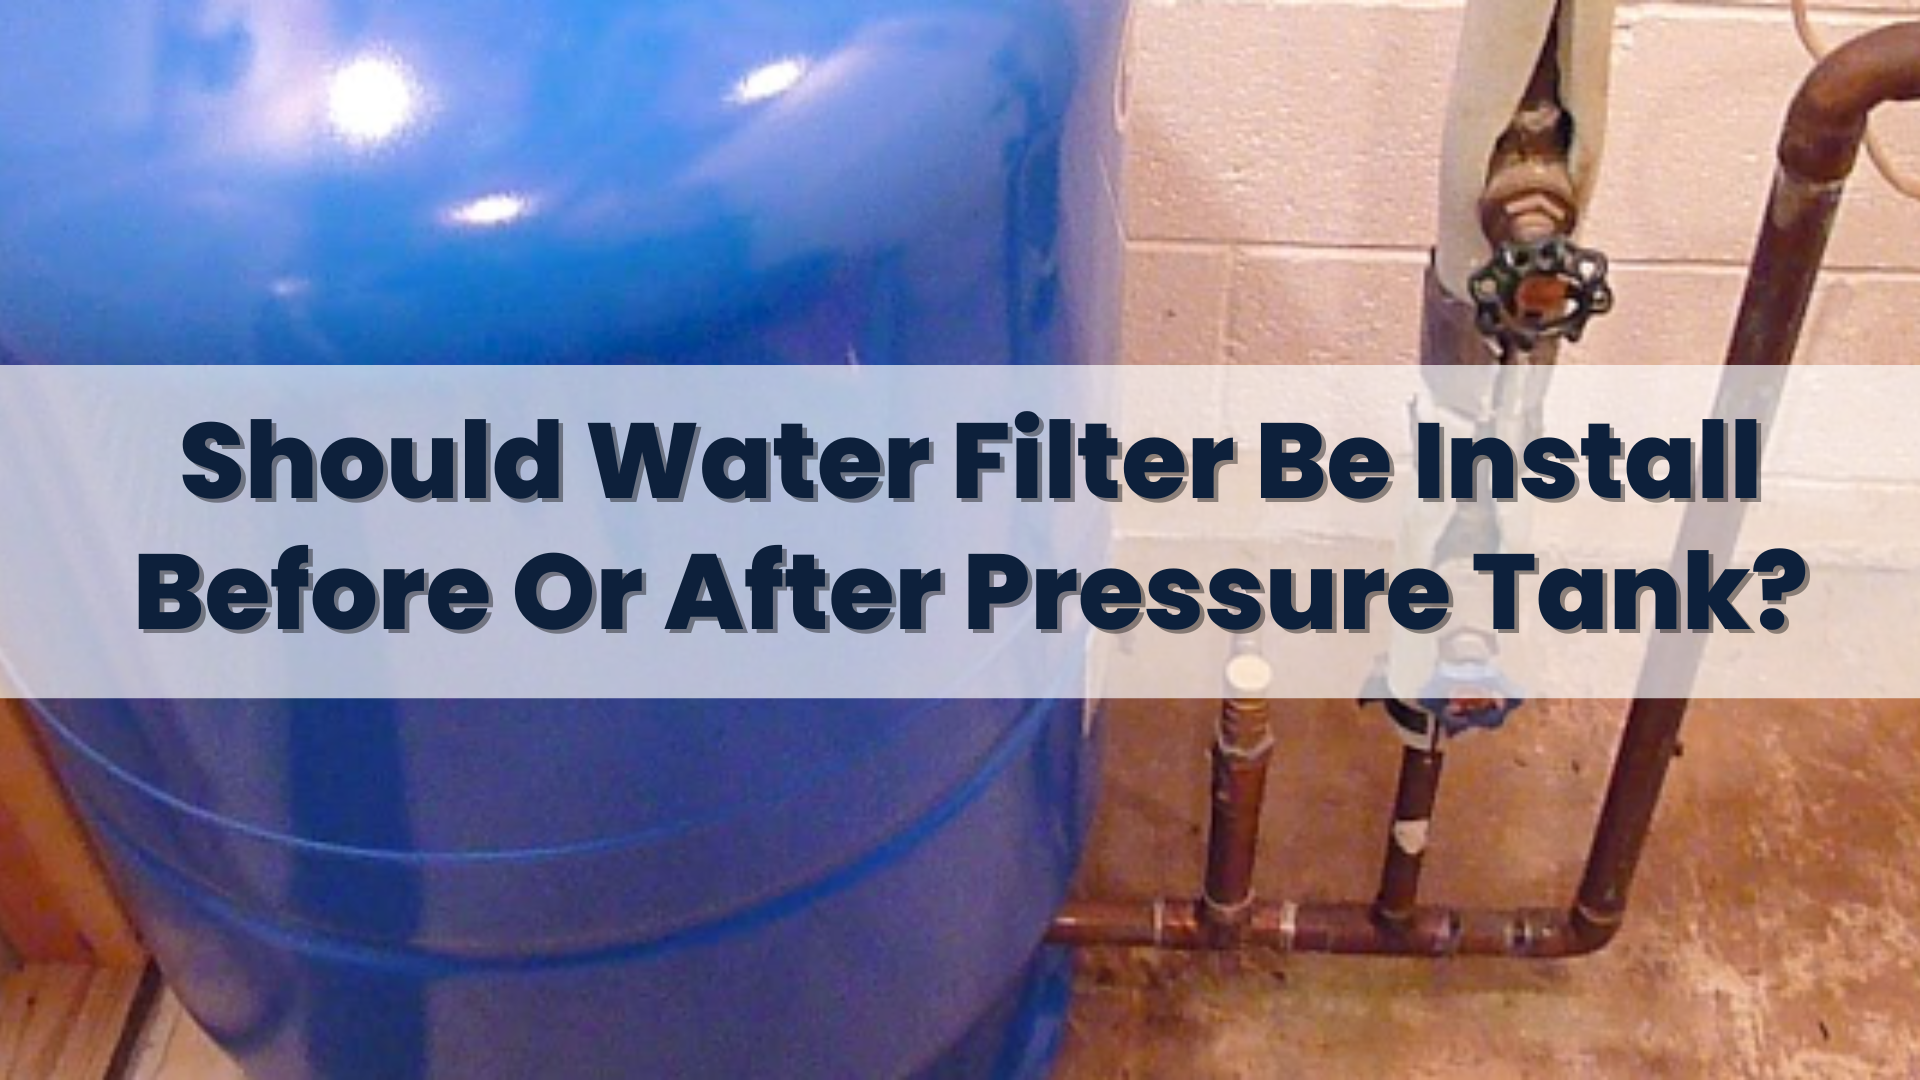 Should Water Filter Be Install Before Or After Pressure Tank